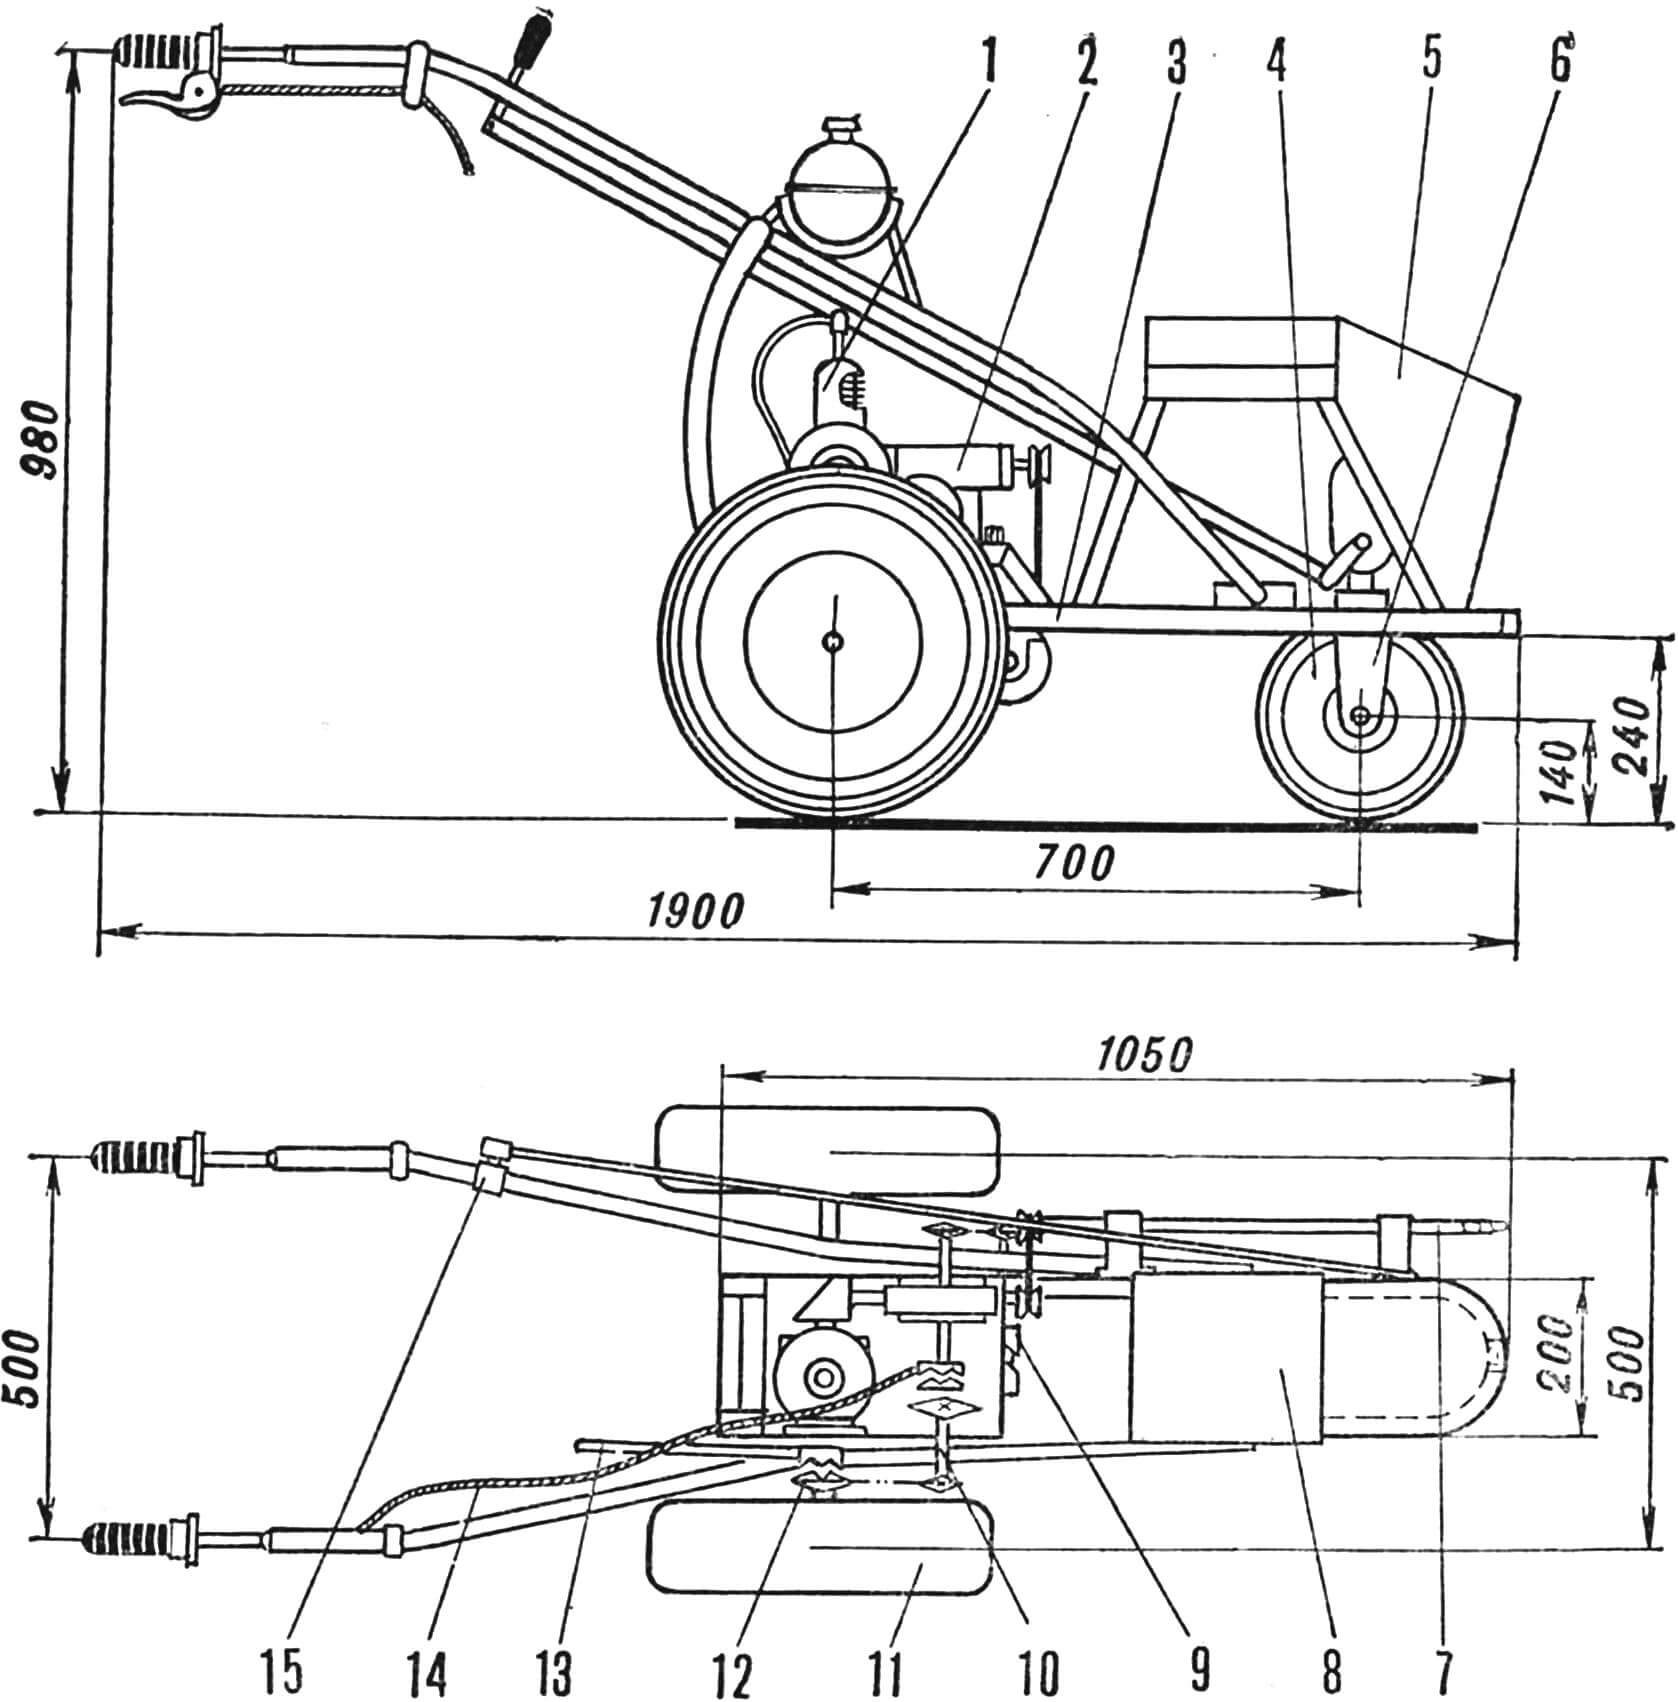 Fig. 2. Layout of 'CINDERELLA' in the three-wheeled version